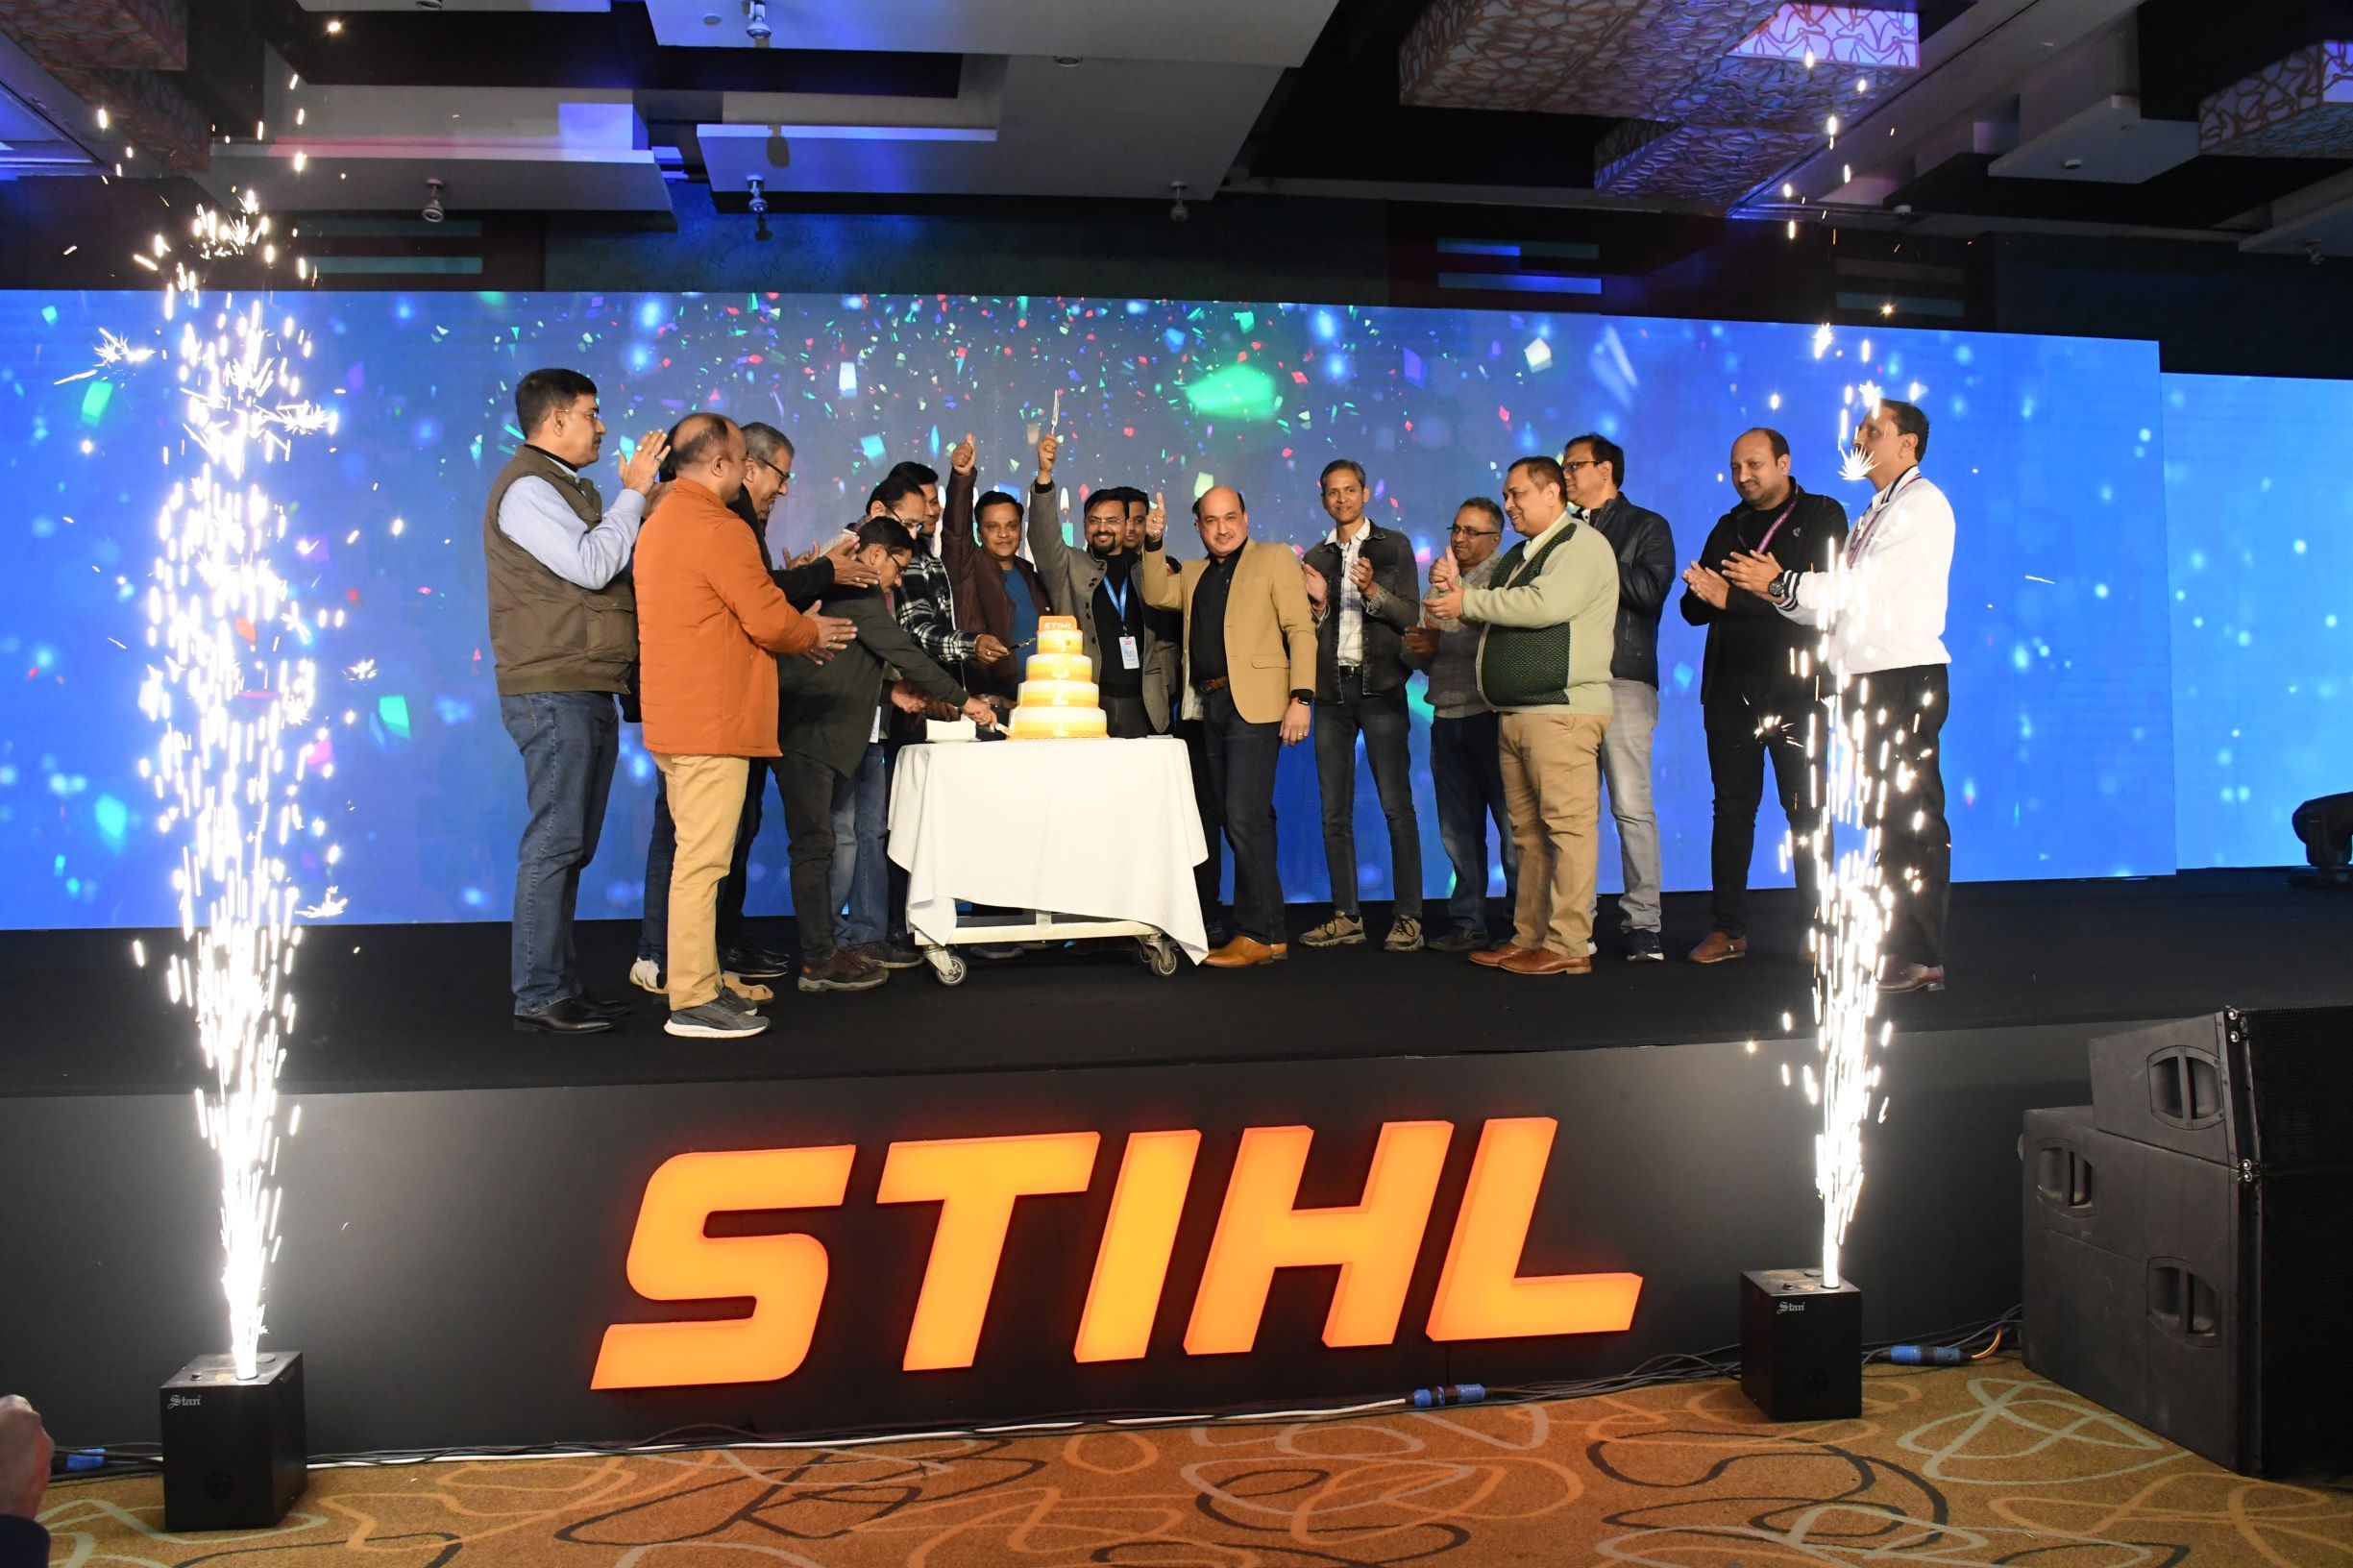 STIHL India's new product has launched in Delhi by brand ambassador Sonu Sood